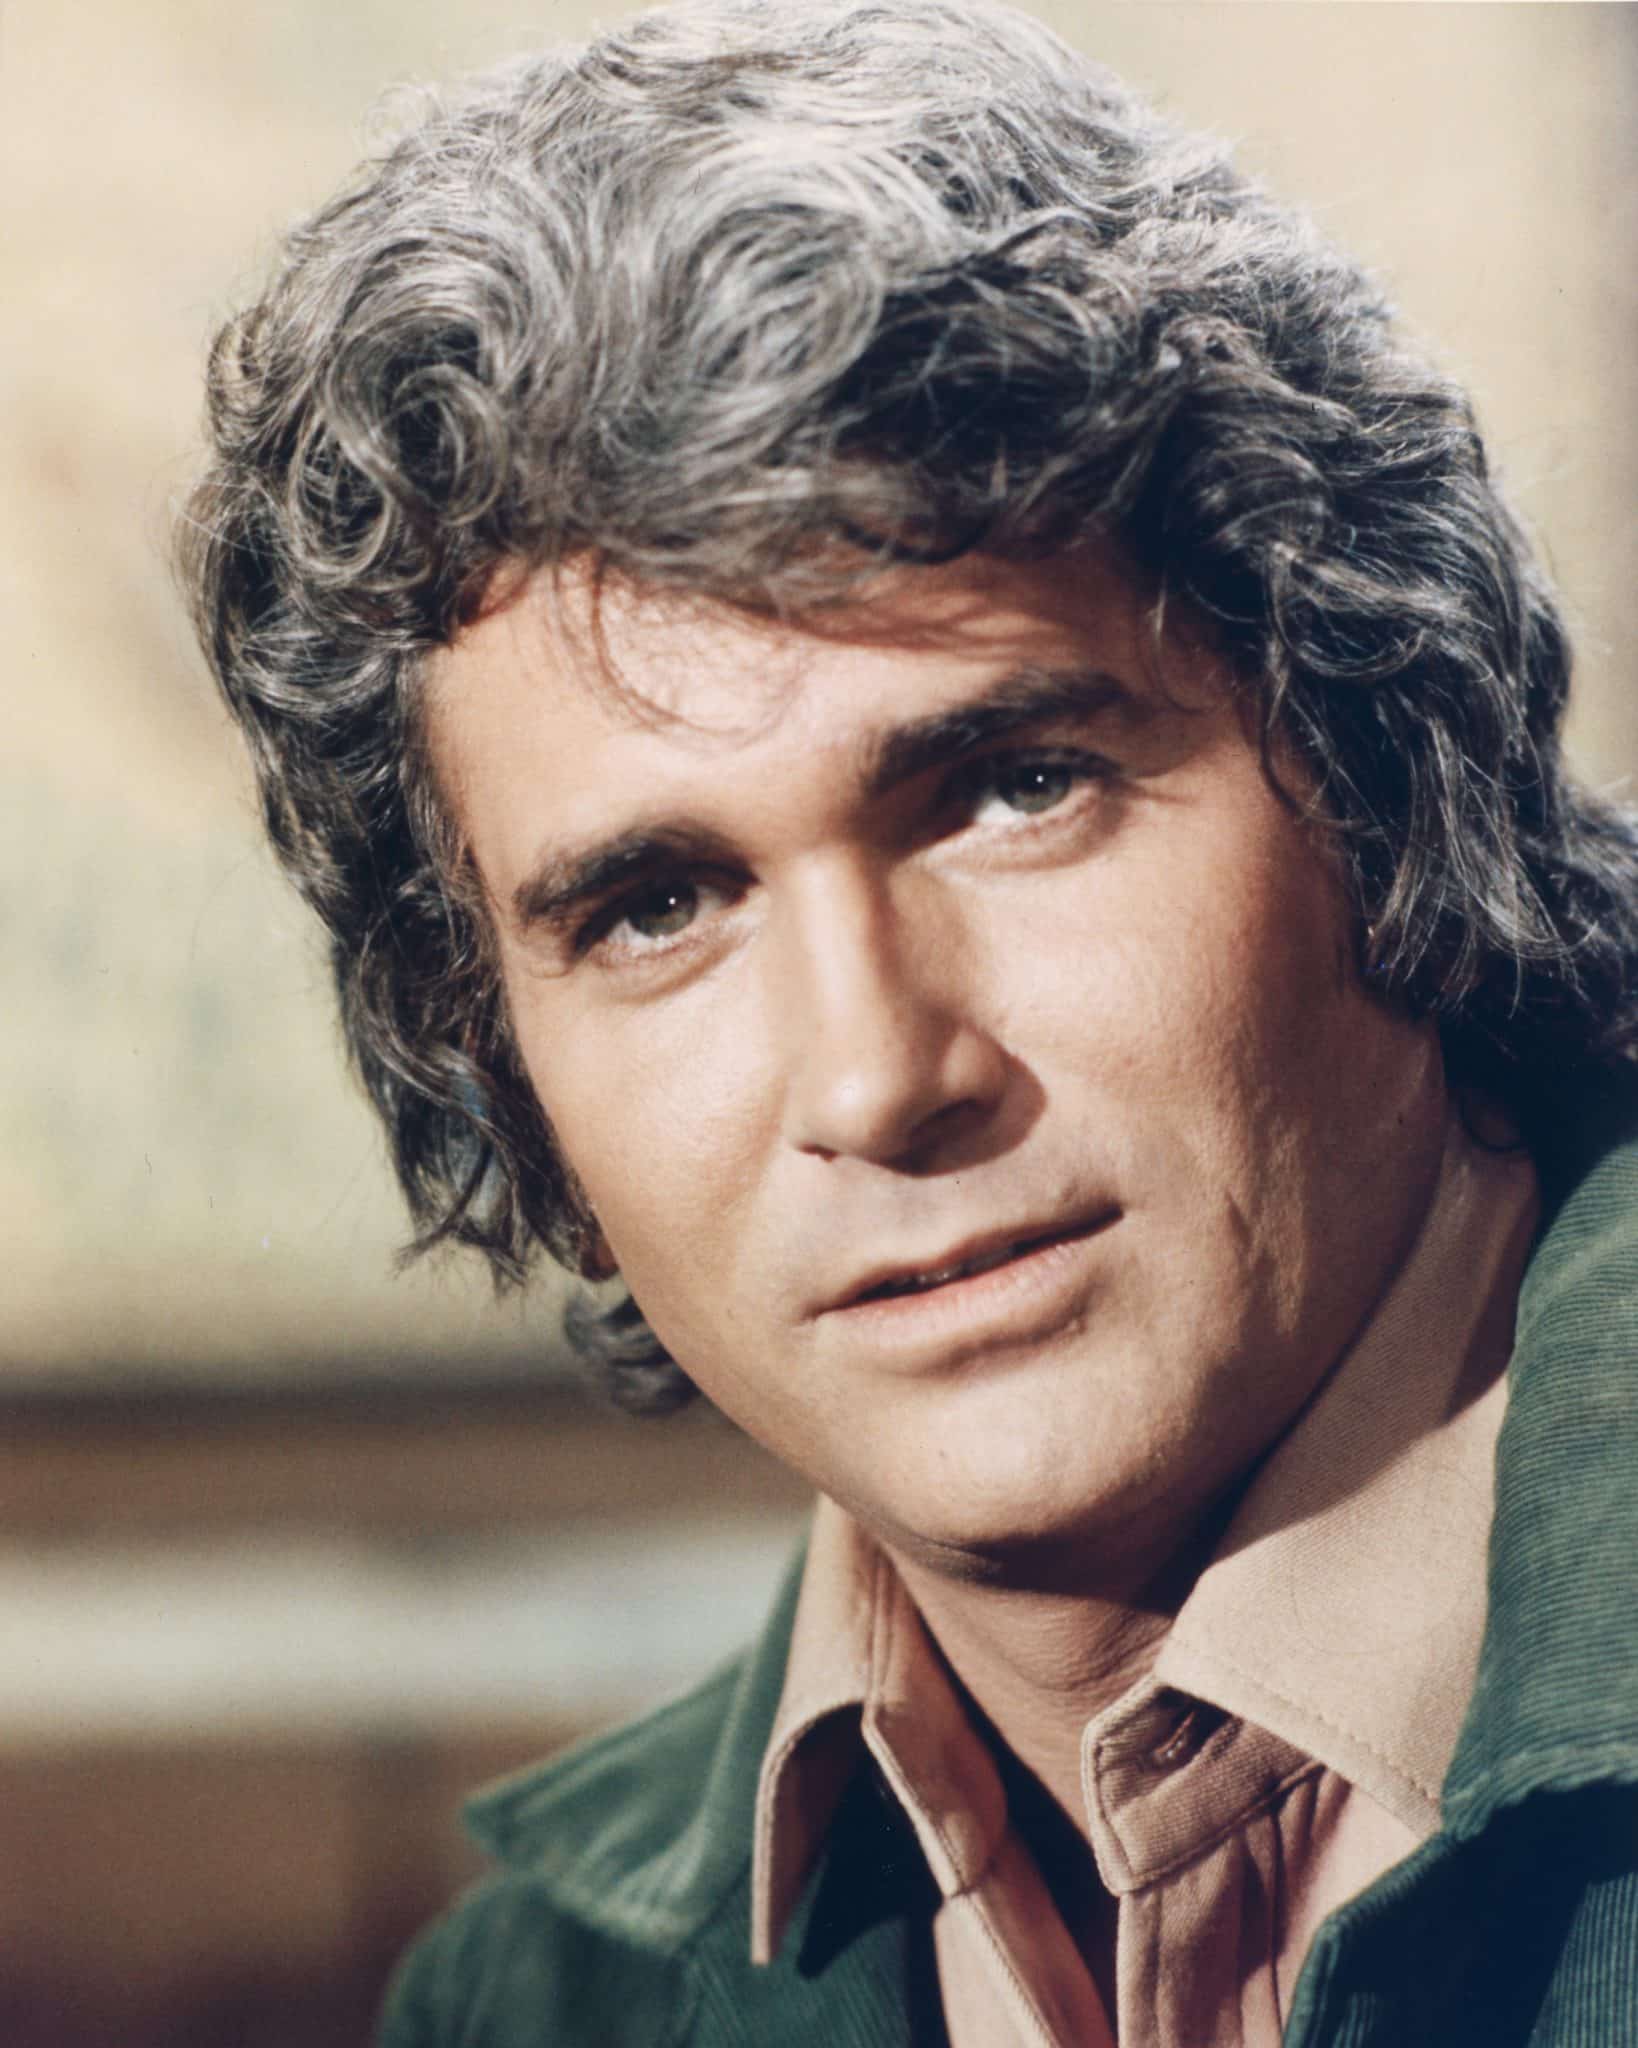 Headshot of Michael Landon (1936-1991), US actor, in a publicity portrait issued for the US television series, 'Bonanza', USA, circa 1970. The western series starred Landon as 'Joseph 'Little Joe' Cartwright'. (Photo by Silver Screen Collection/Getty Images)